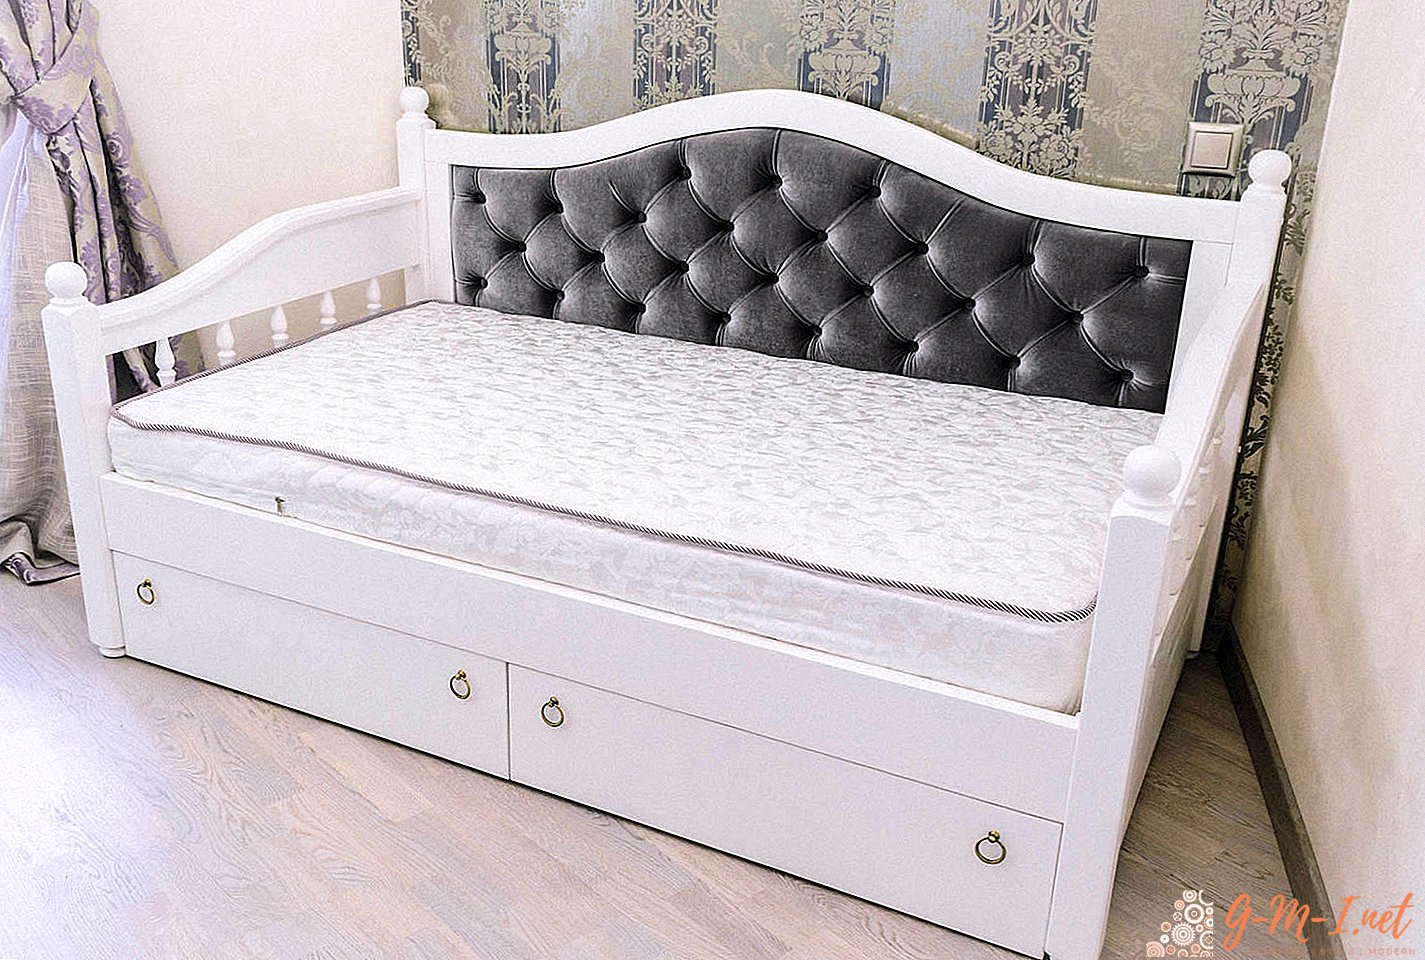 What is the difference between an ottoman and a bed